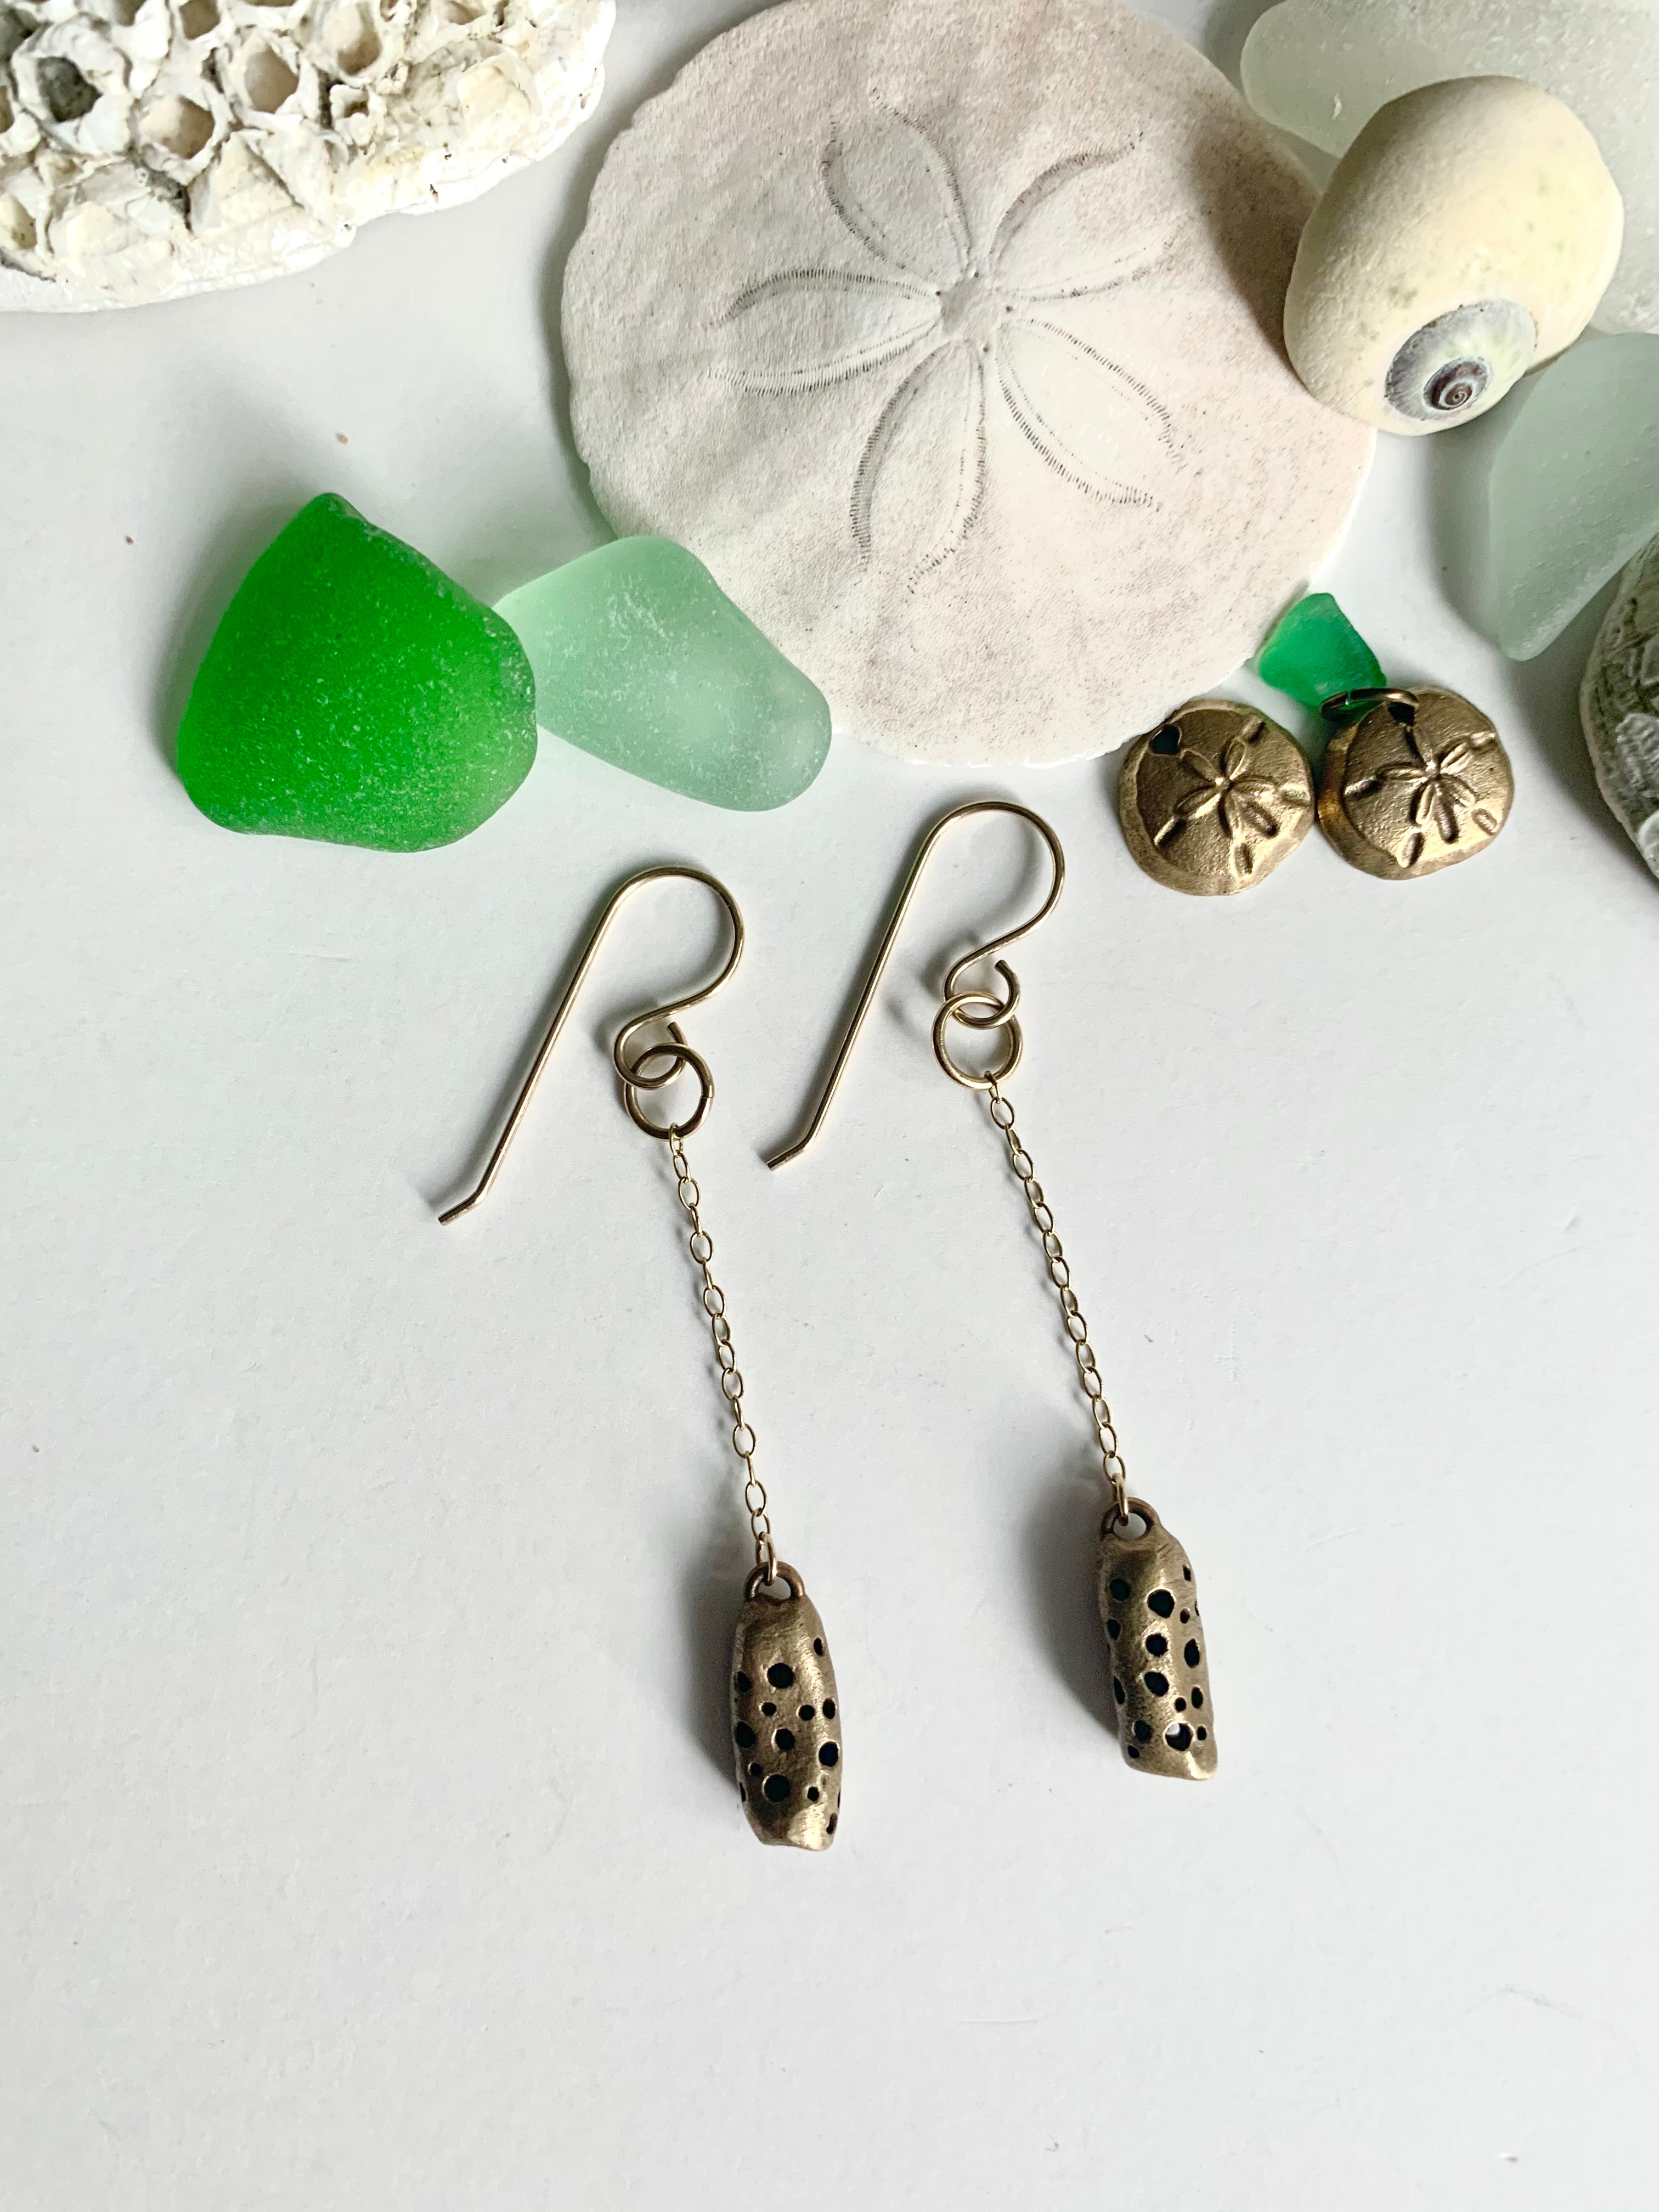 Fun bronze everyday earrings with seaglass and sand dollars